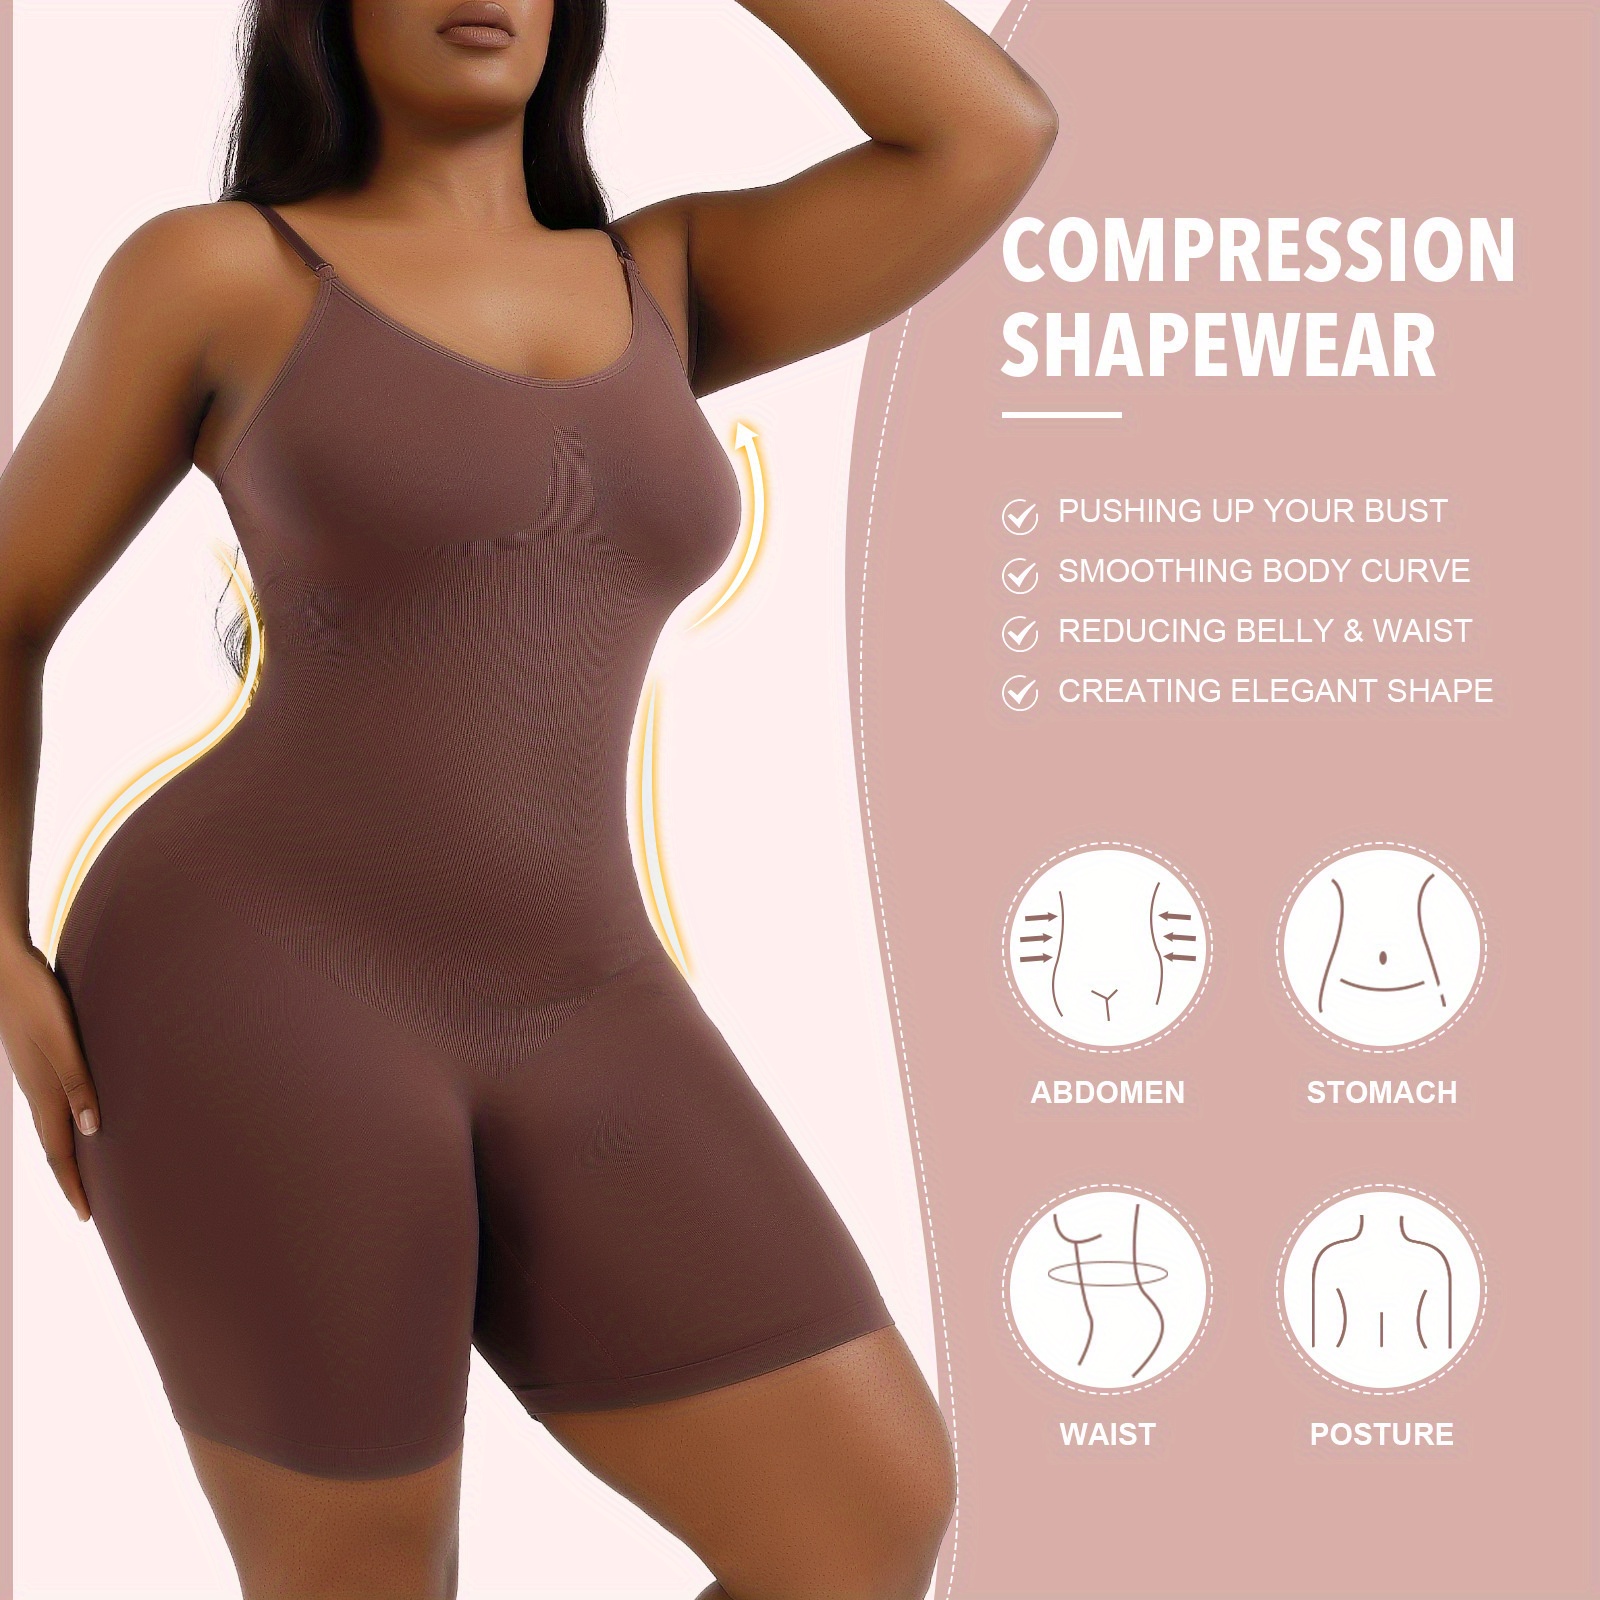 Is Curvely Snatching Shapewear Bodysuit really Reducing 2” of my waist? 